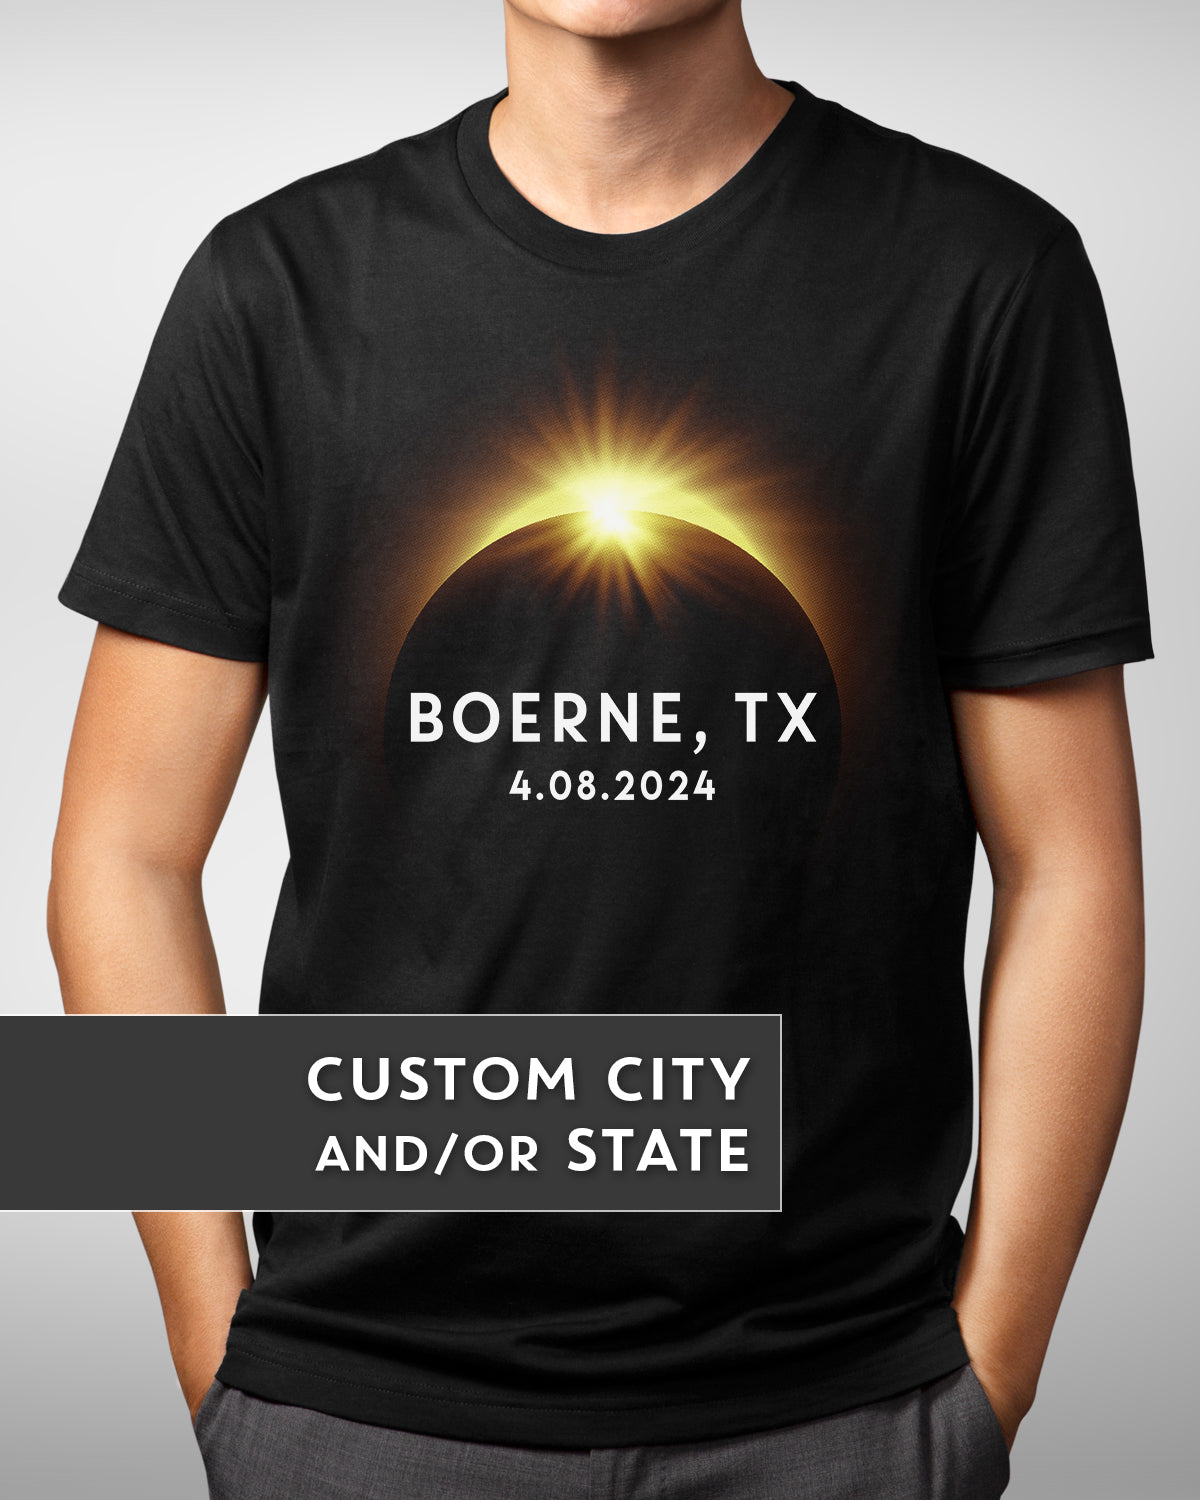 Custom City State Total Solar Eclipse Shirt - 8th April 2024, Totality Souvenir Tee, Family Matching Gift